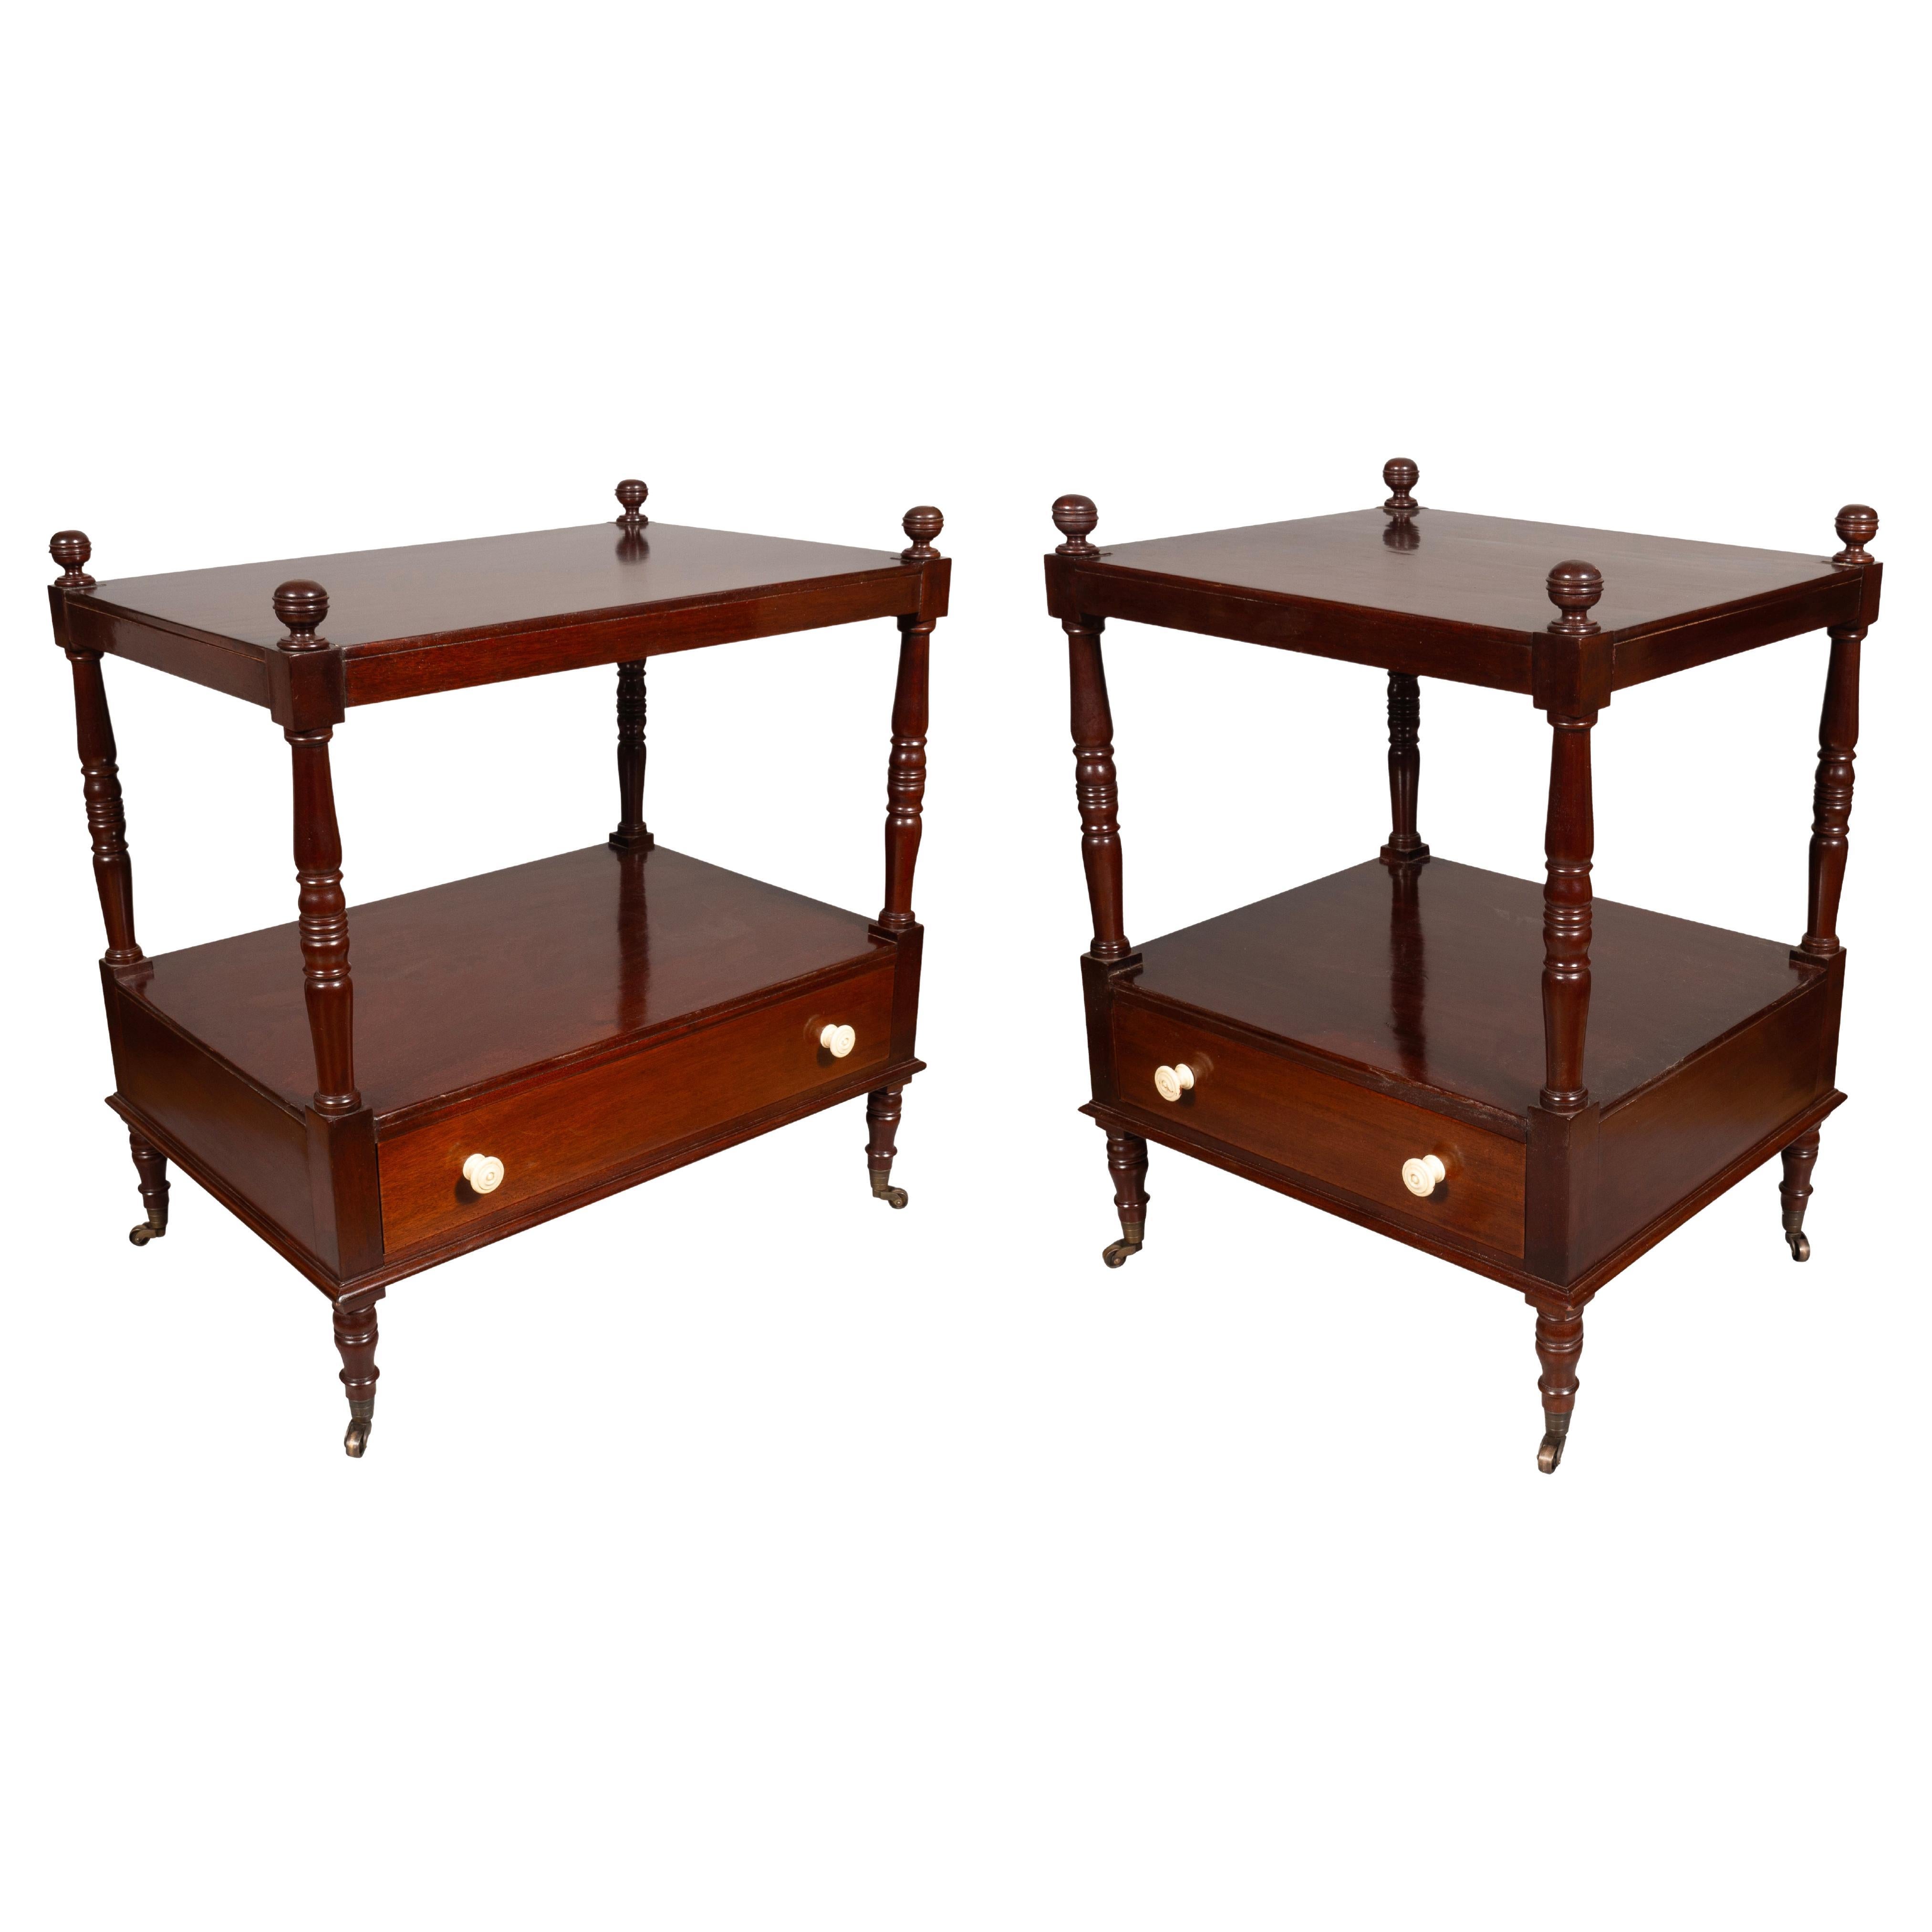 Matched Pair Of Regency Style Mahogany End Tables